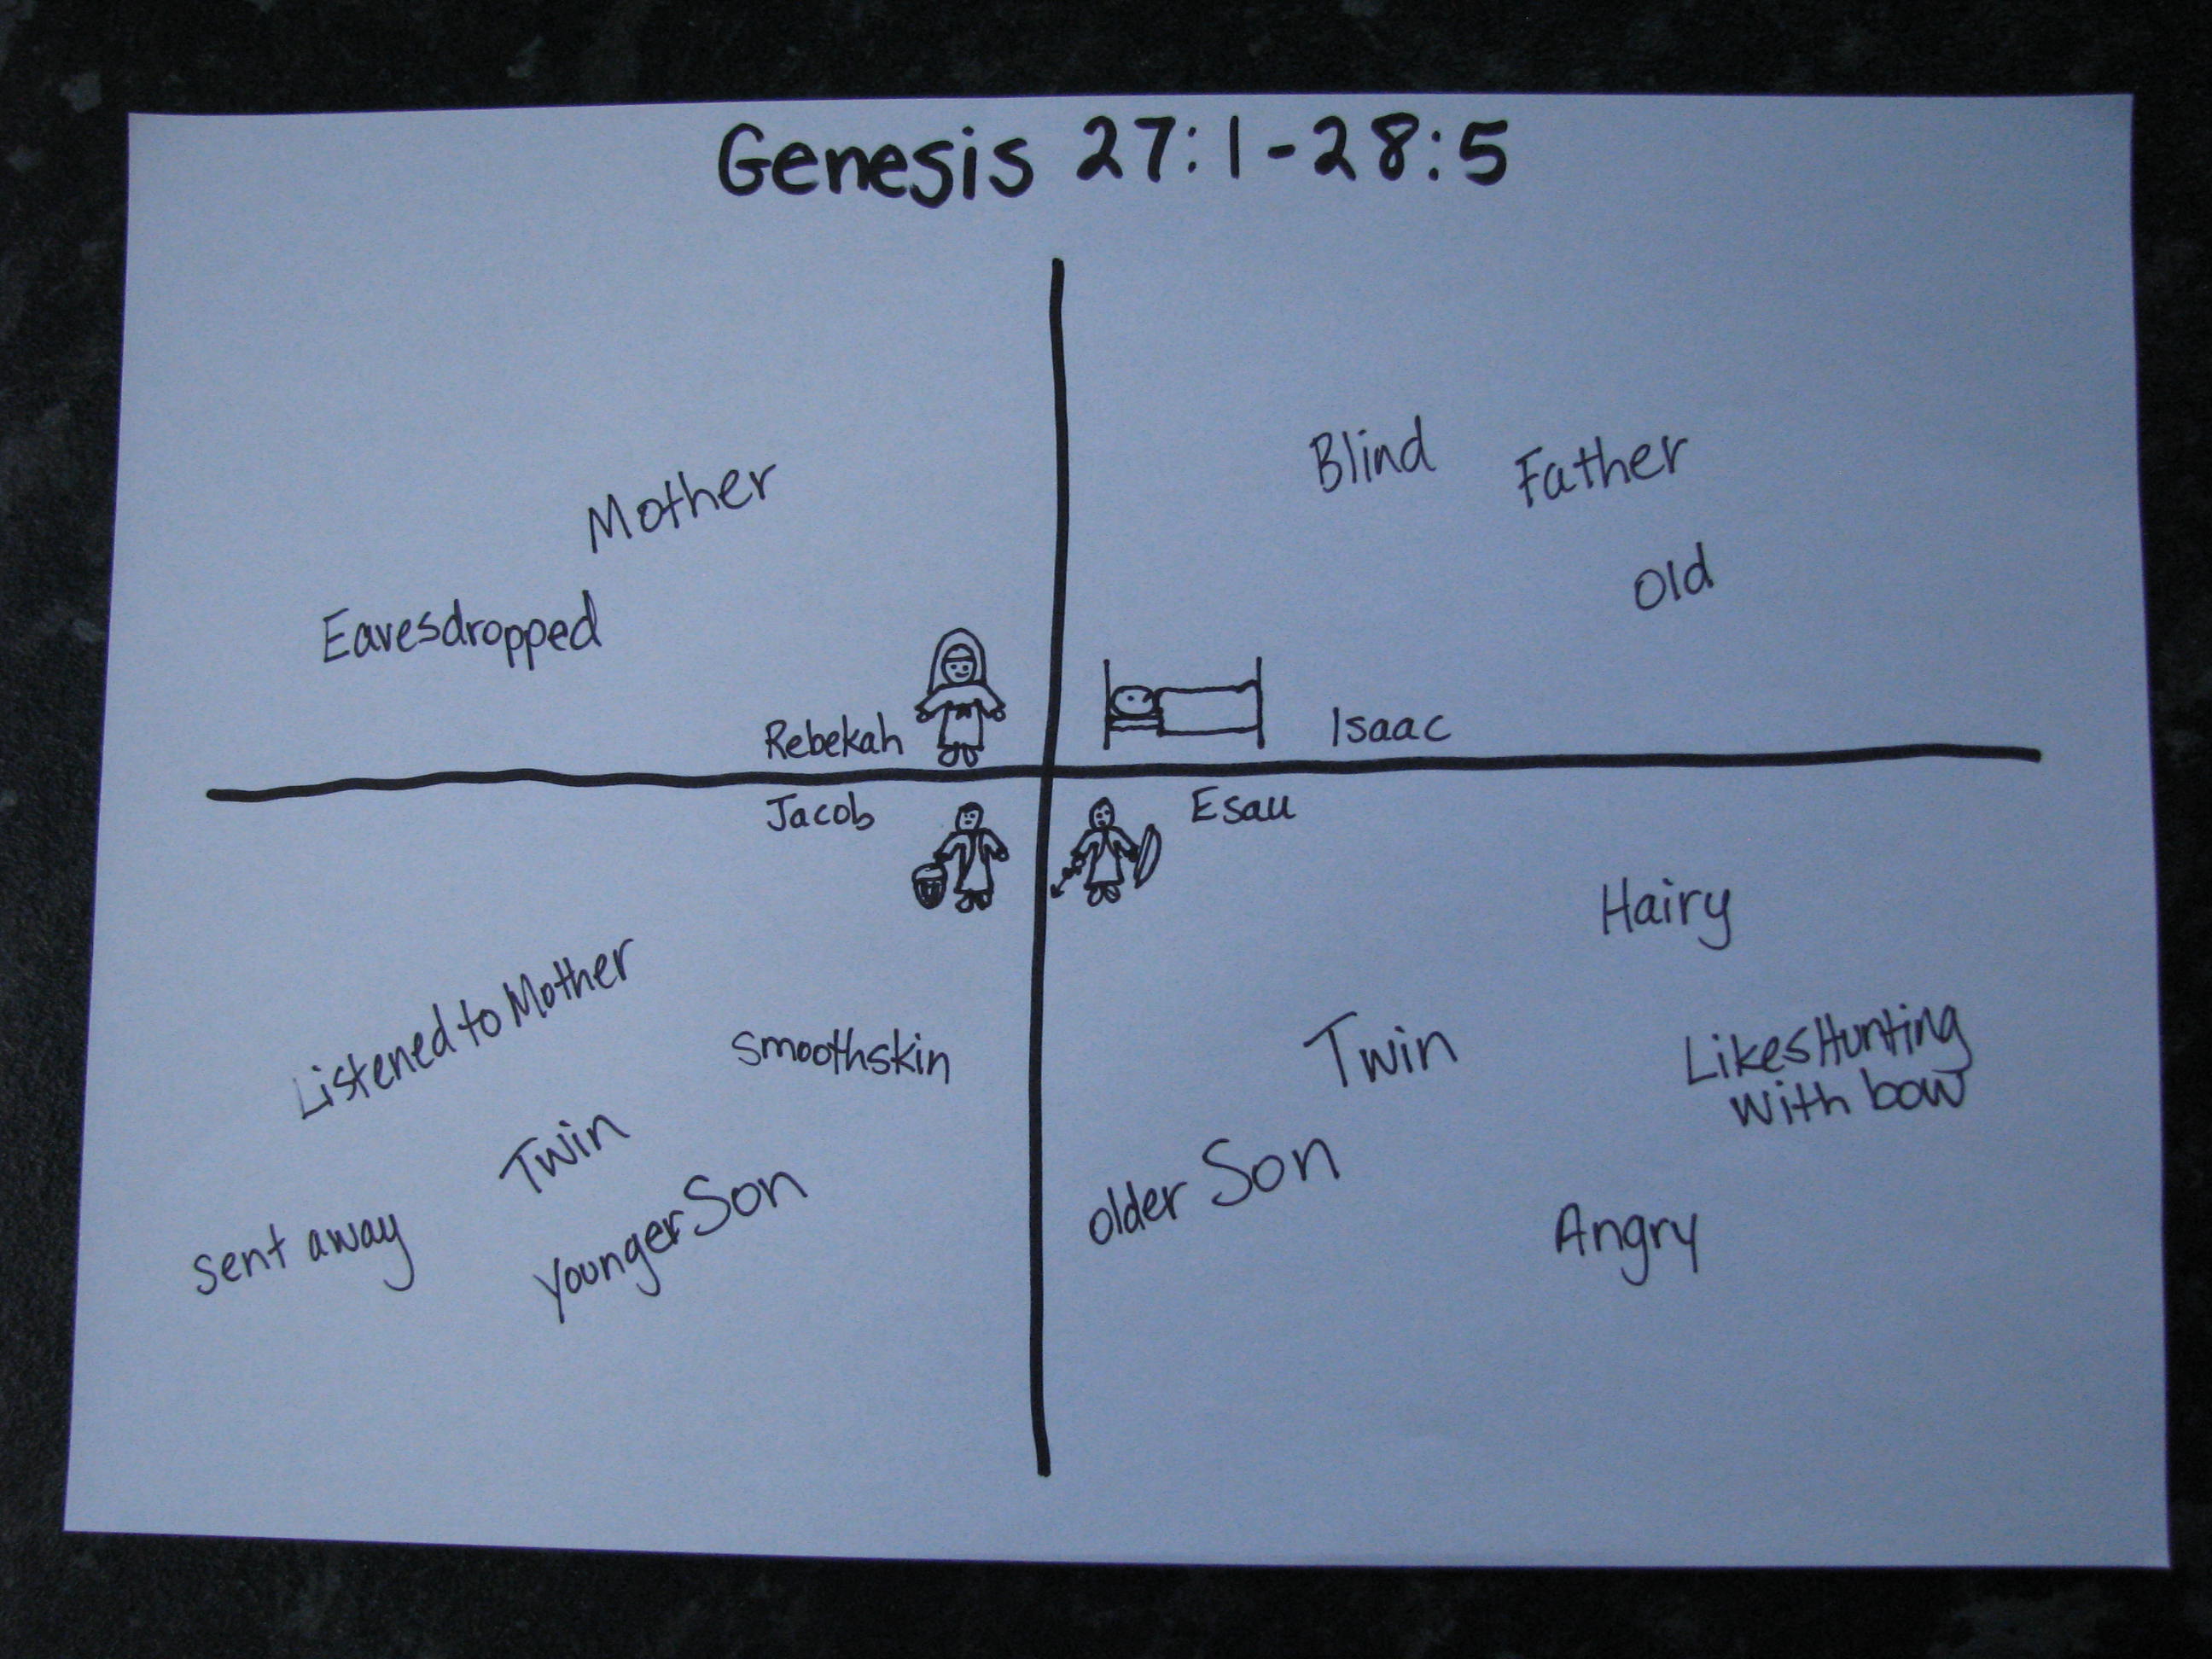 Draw a grid on paper and mark categories. Fill each category with thoughts and ideas you have learned in the Bible story.